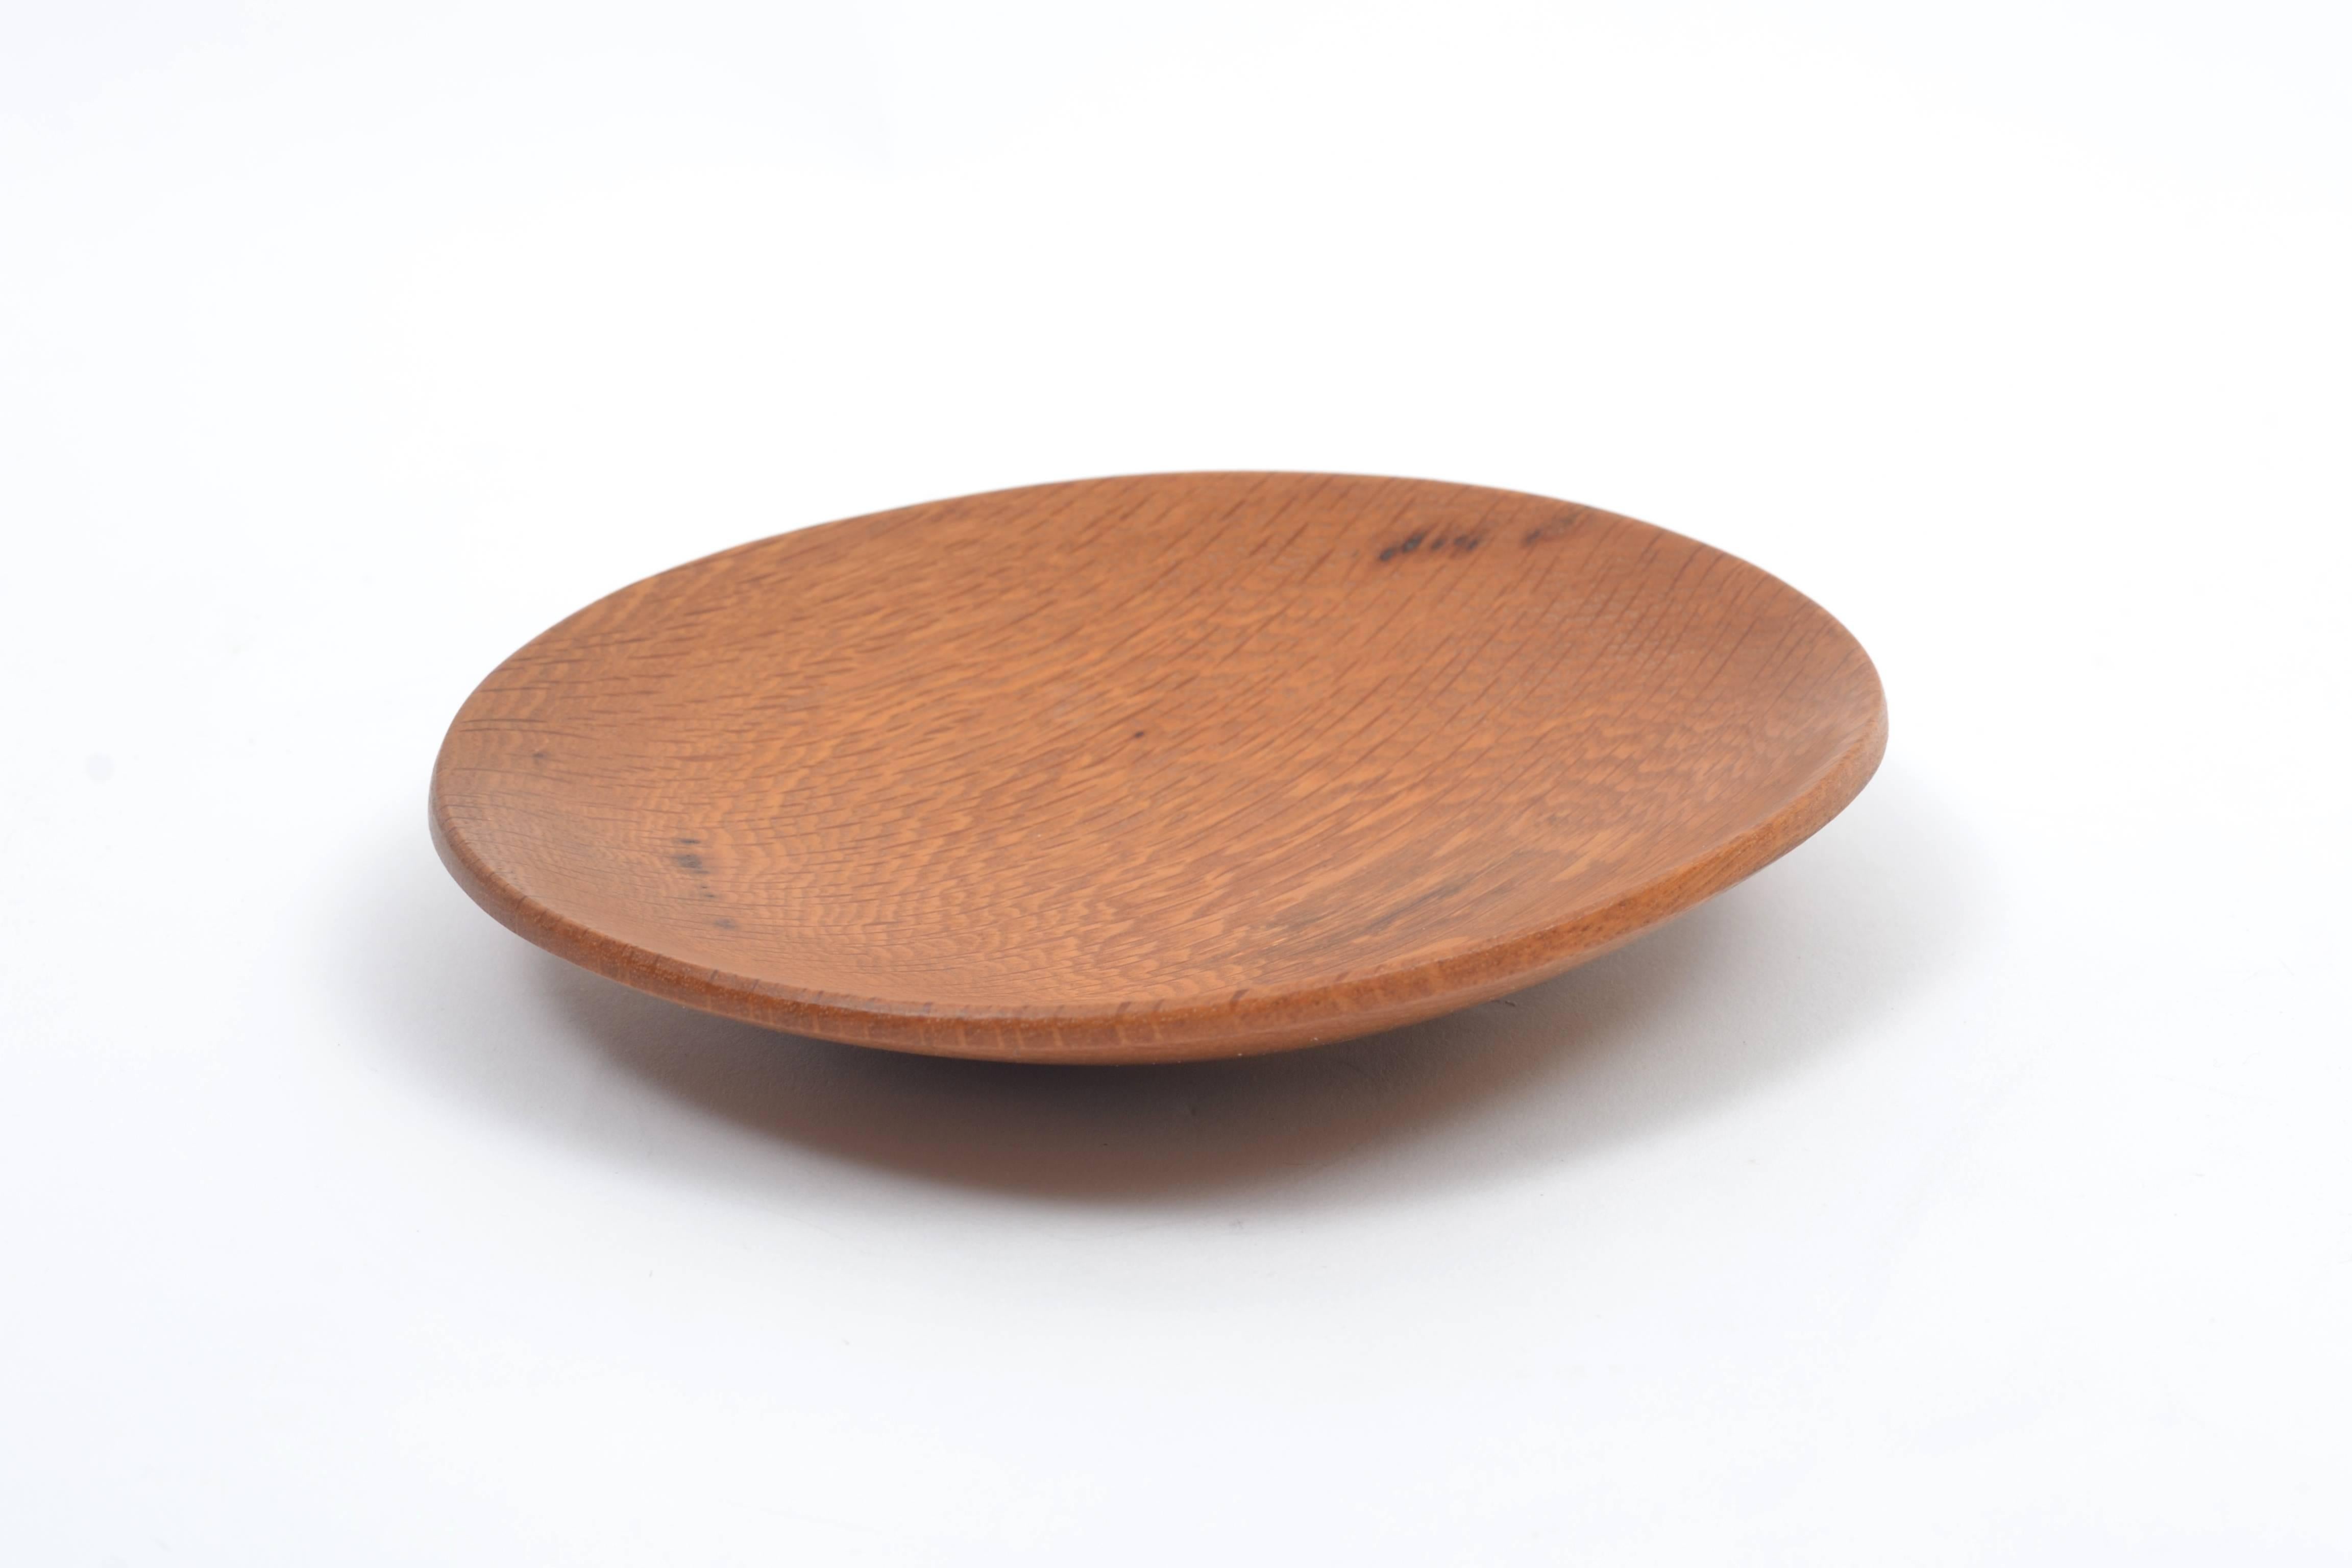 This wonderful bowl was crafted from a large oak tree that rested between the guest house and main home of famed architect Frank Lloyd Wright's falling water. Upon concern that the oak may fall on the guest house, it was removed and woodworker